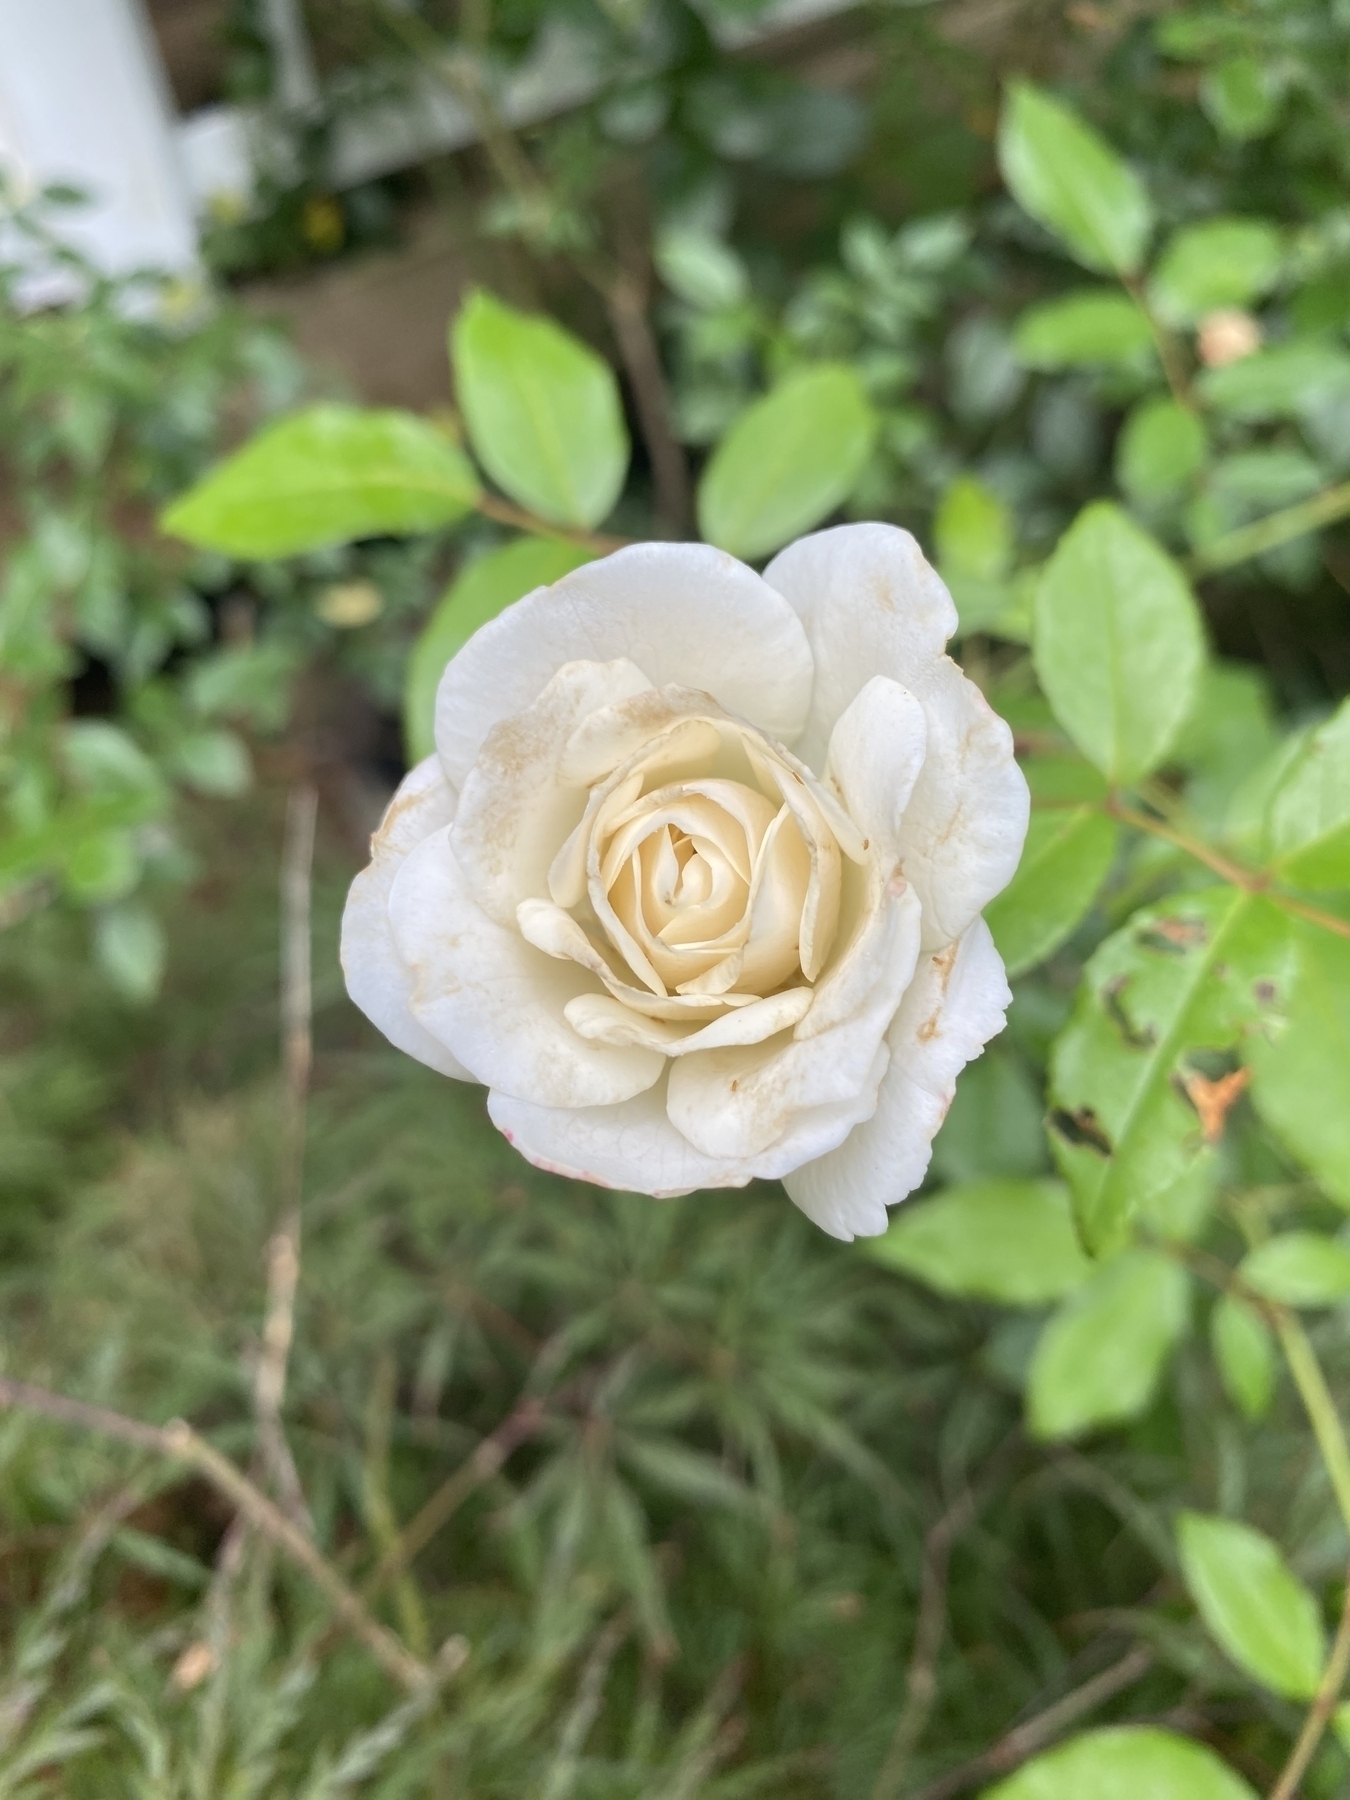 A picture of a white rose with a hint of pink.